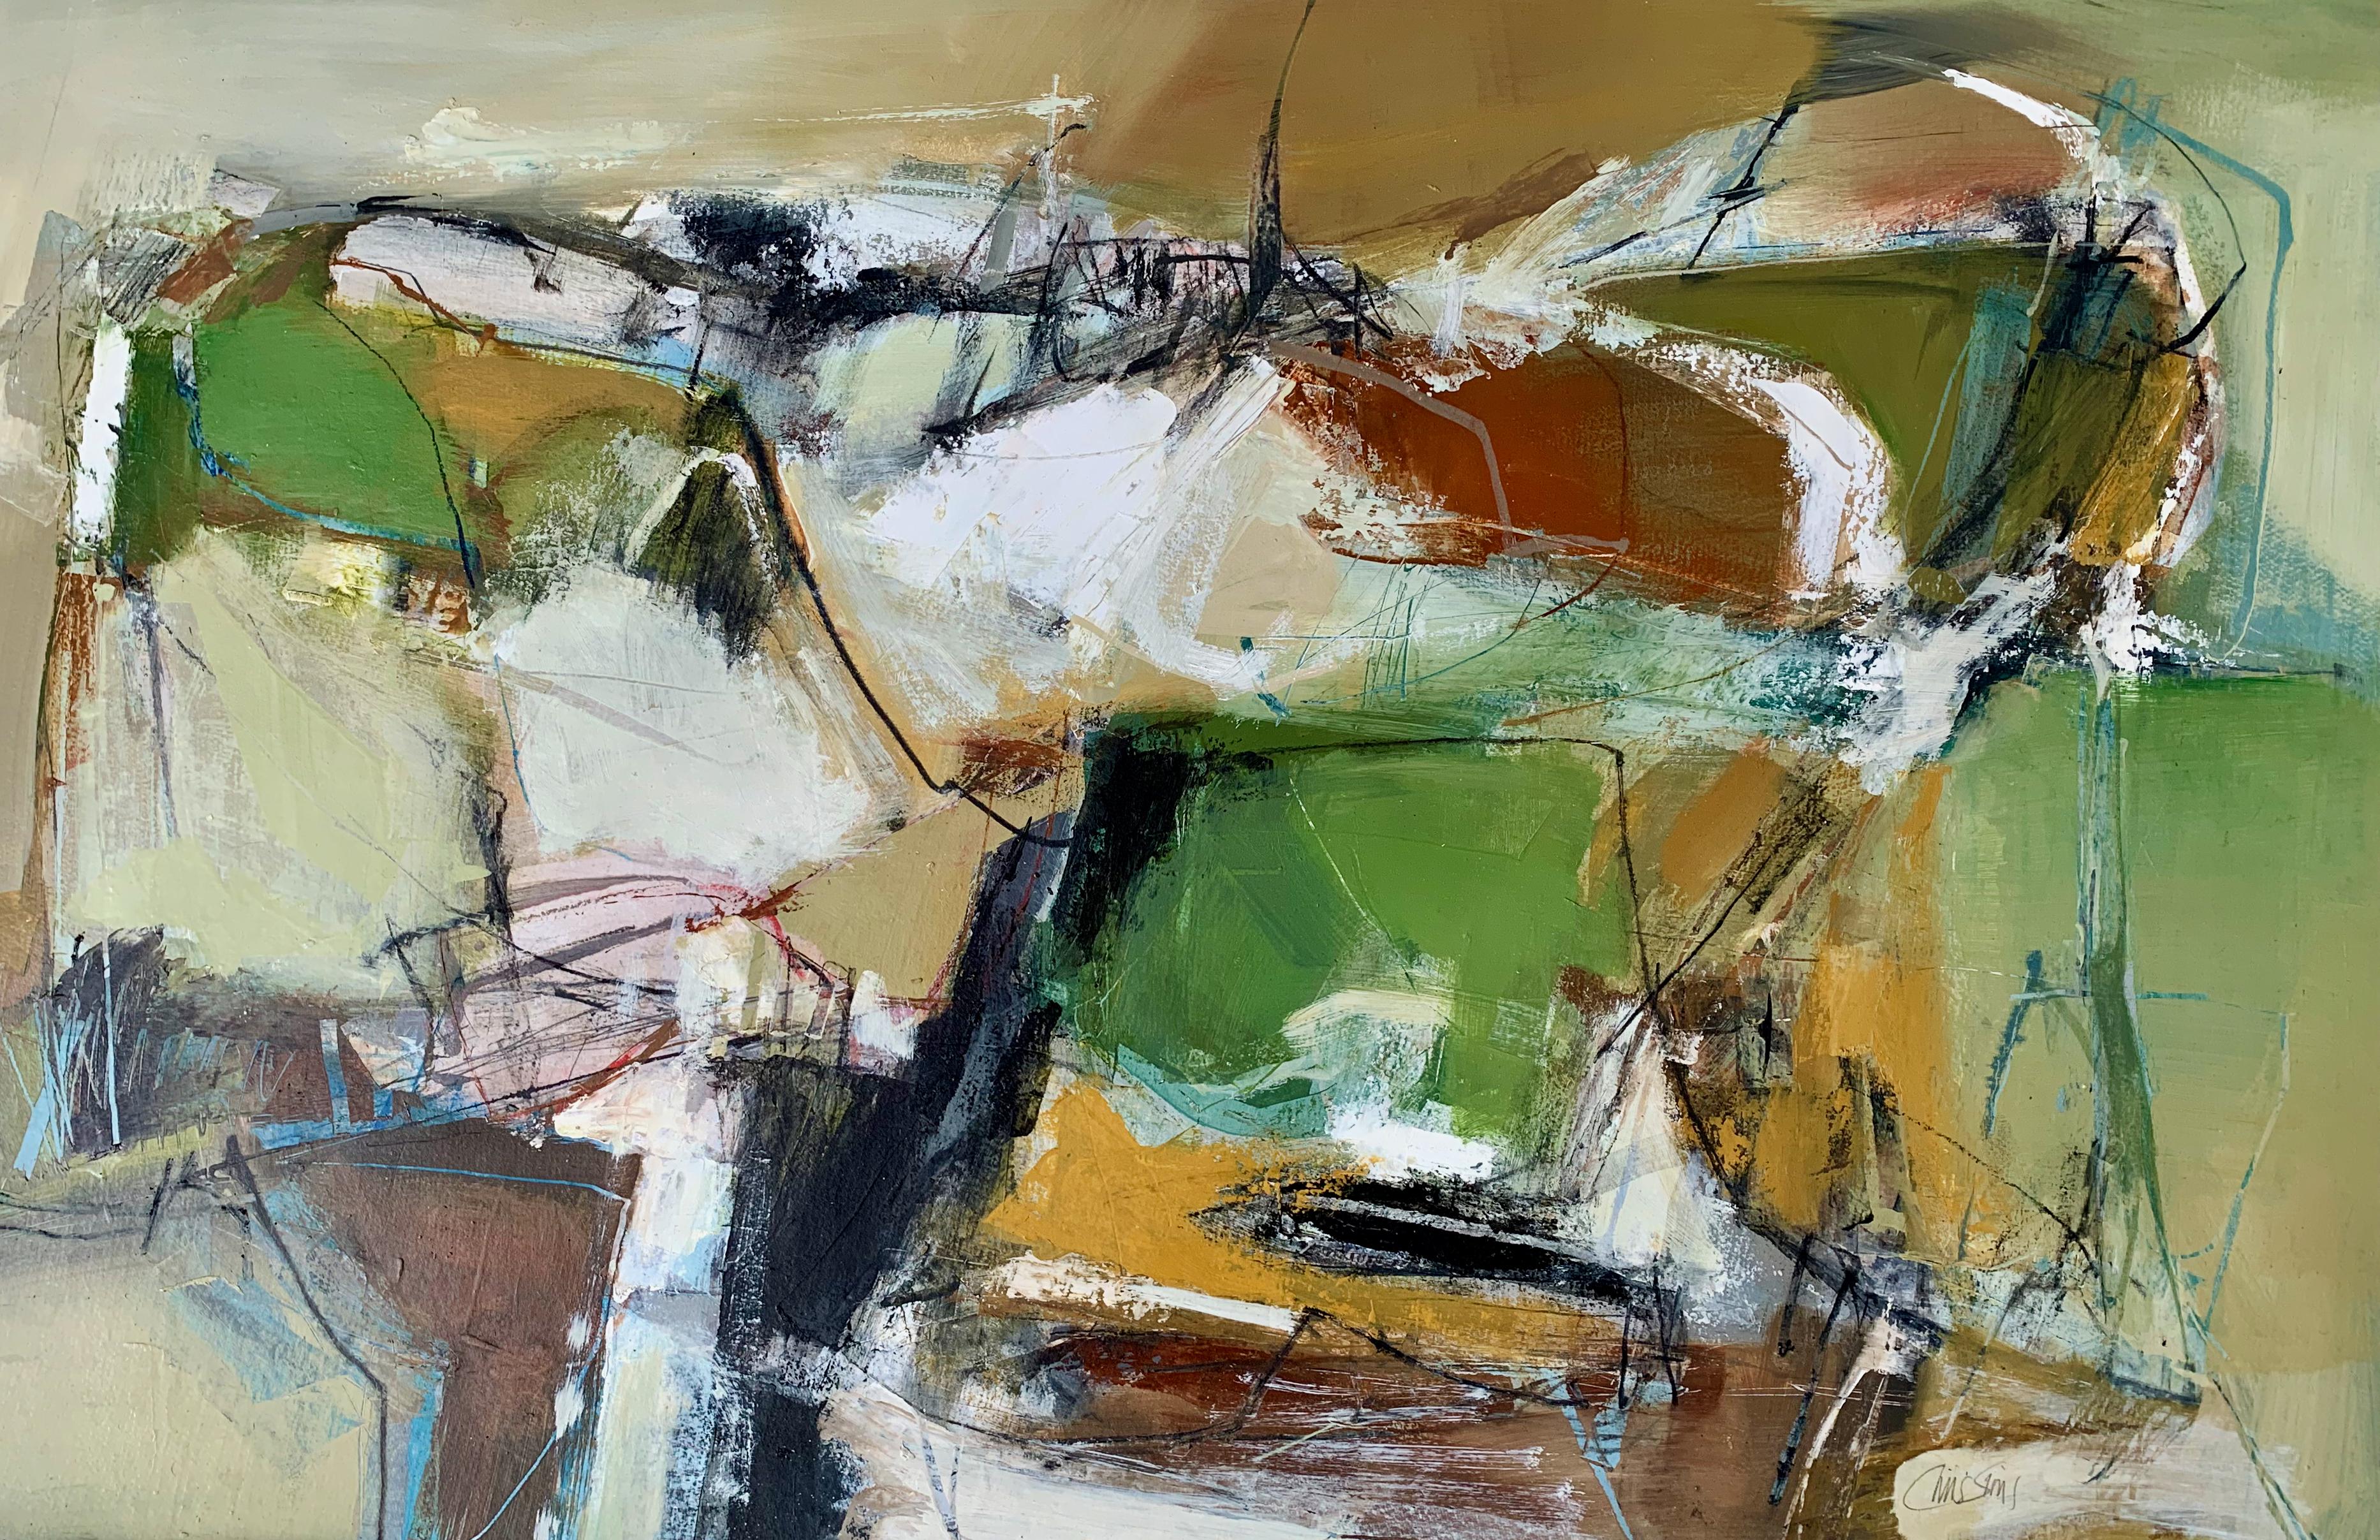 Find My Way Home (LP32): Abstract Oil Painting on Paper (unframed) by Chris Sims